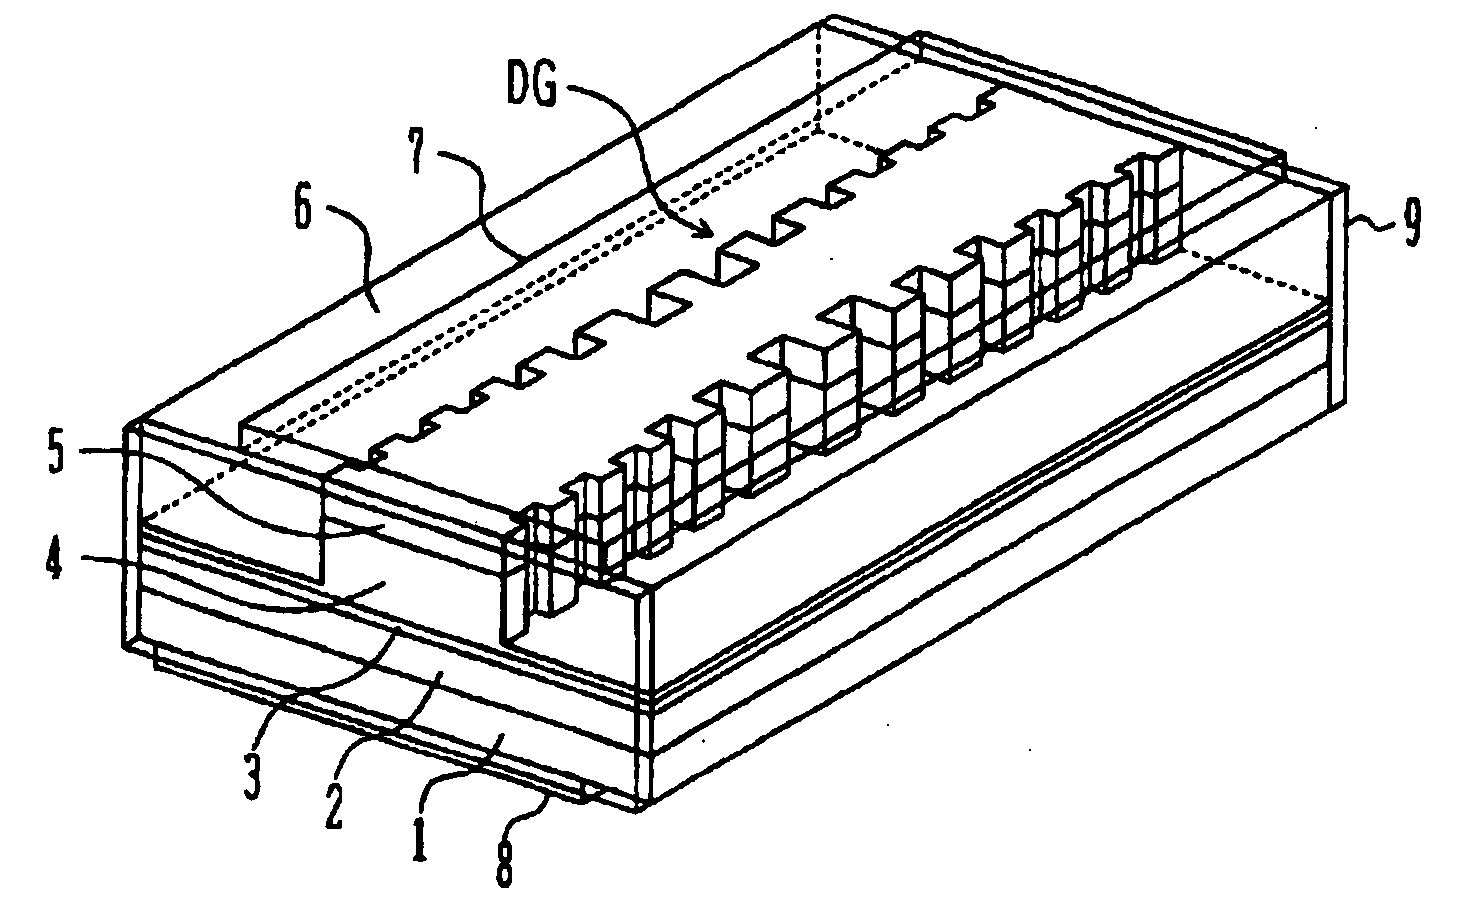 Optical semiconductor device having diffraction grating